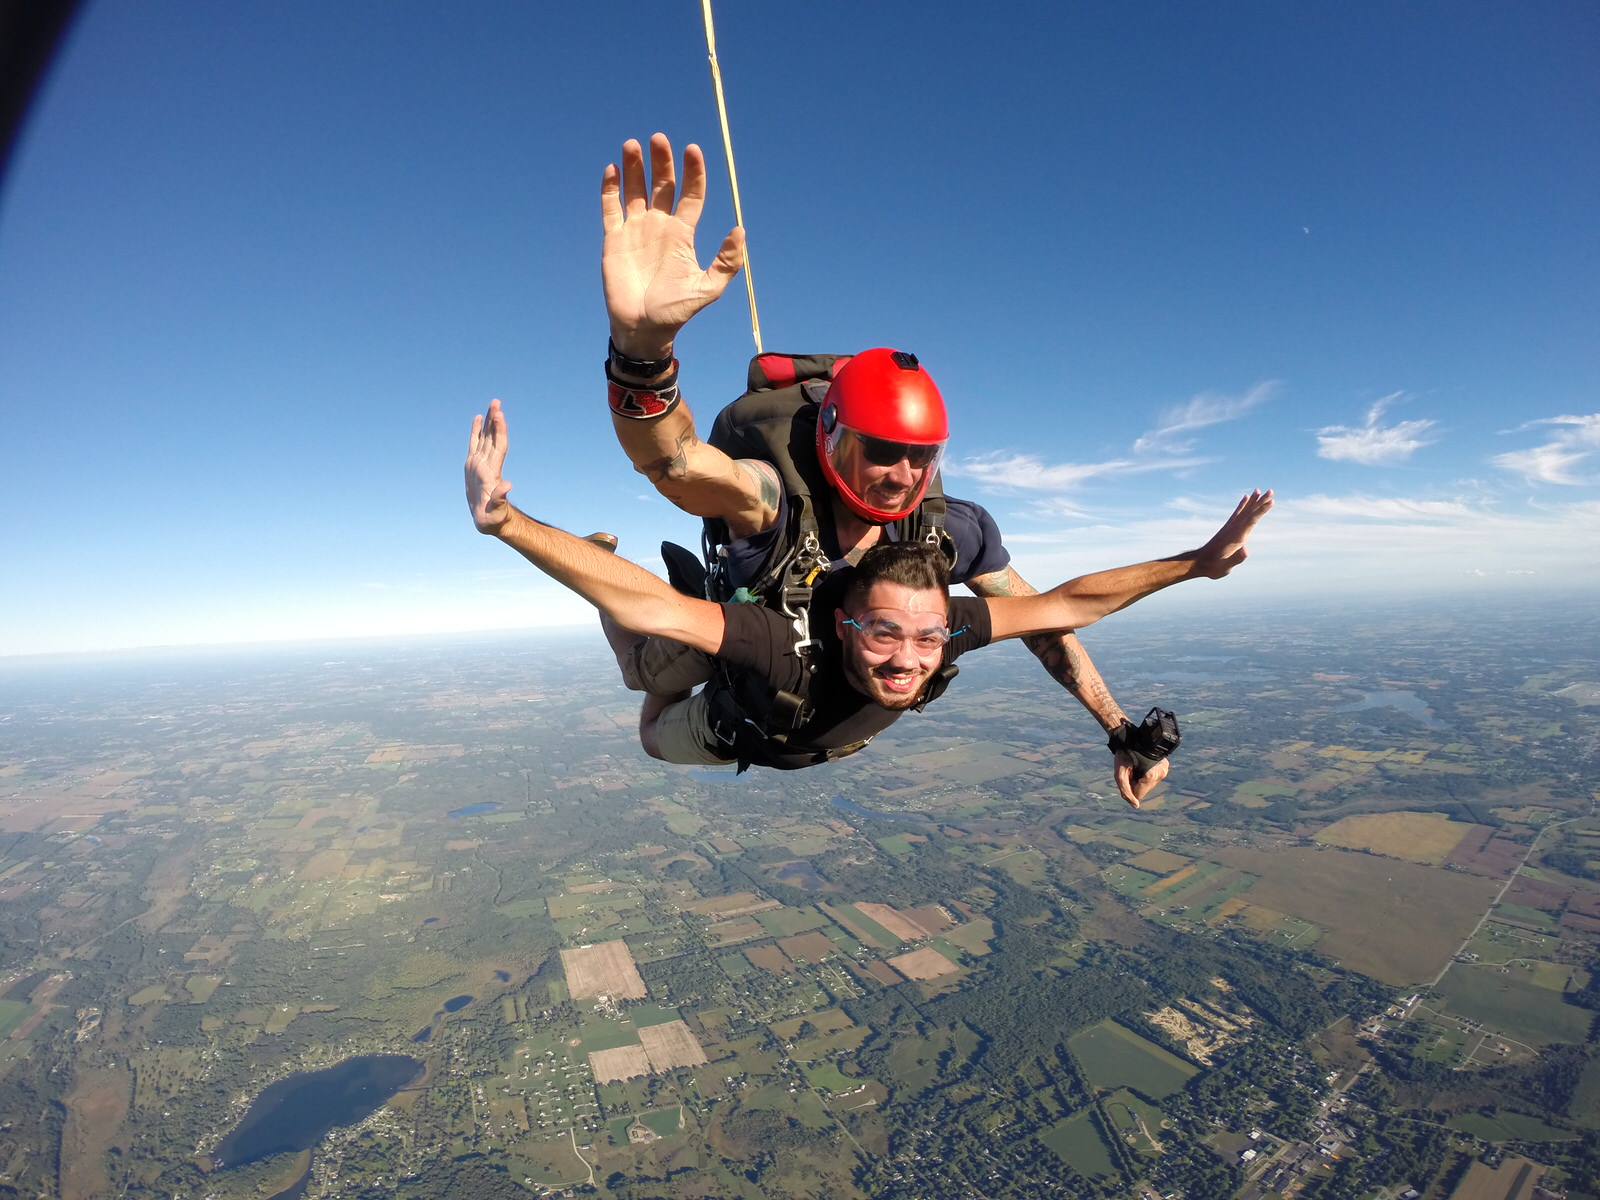 How Safe Is Skydiving?